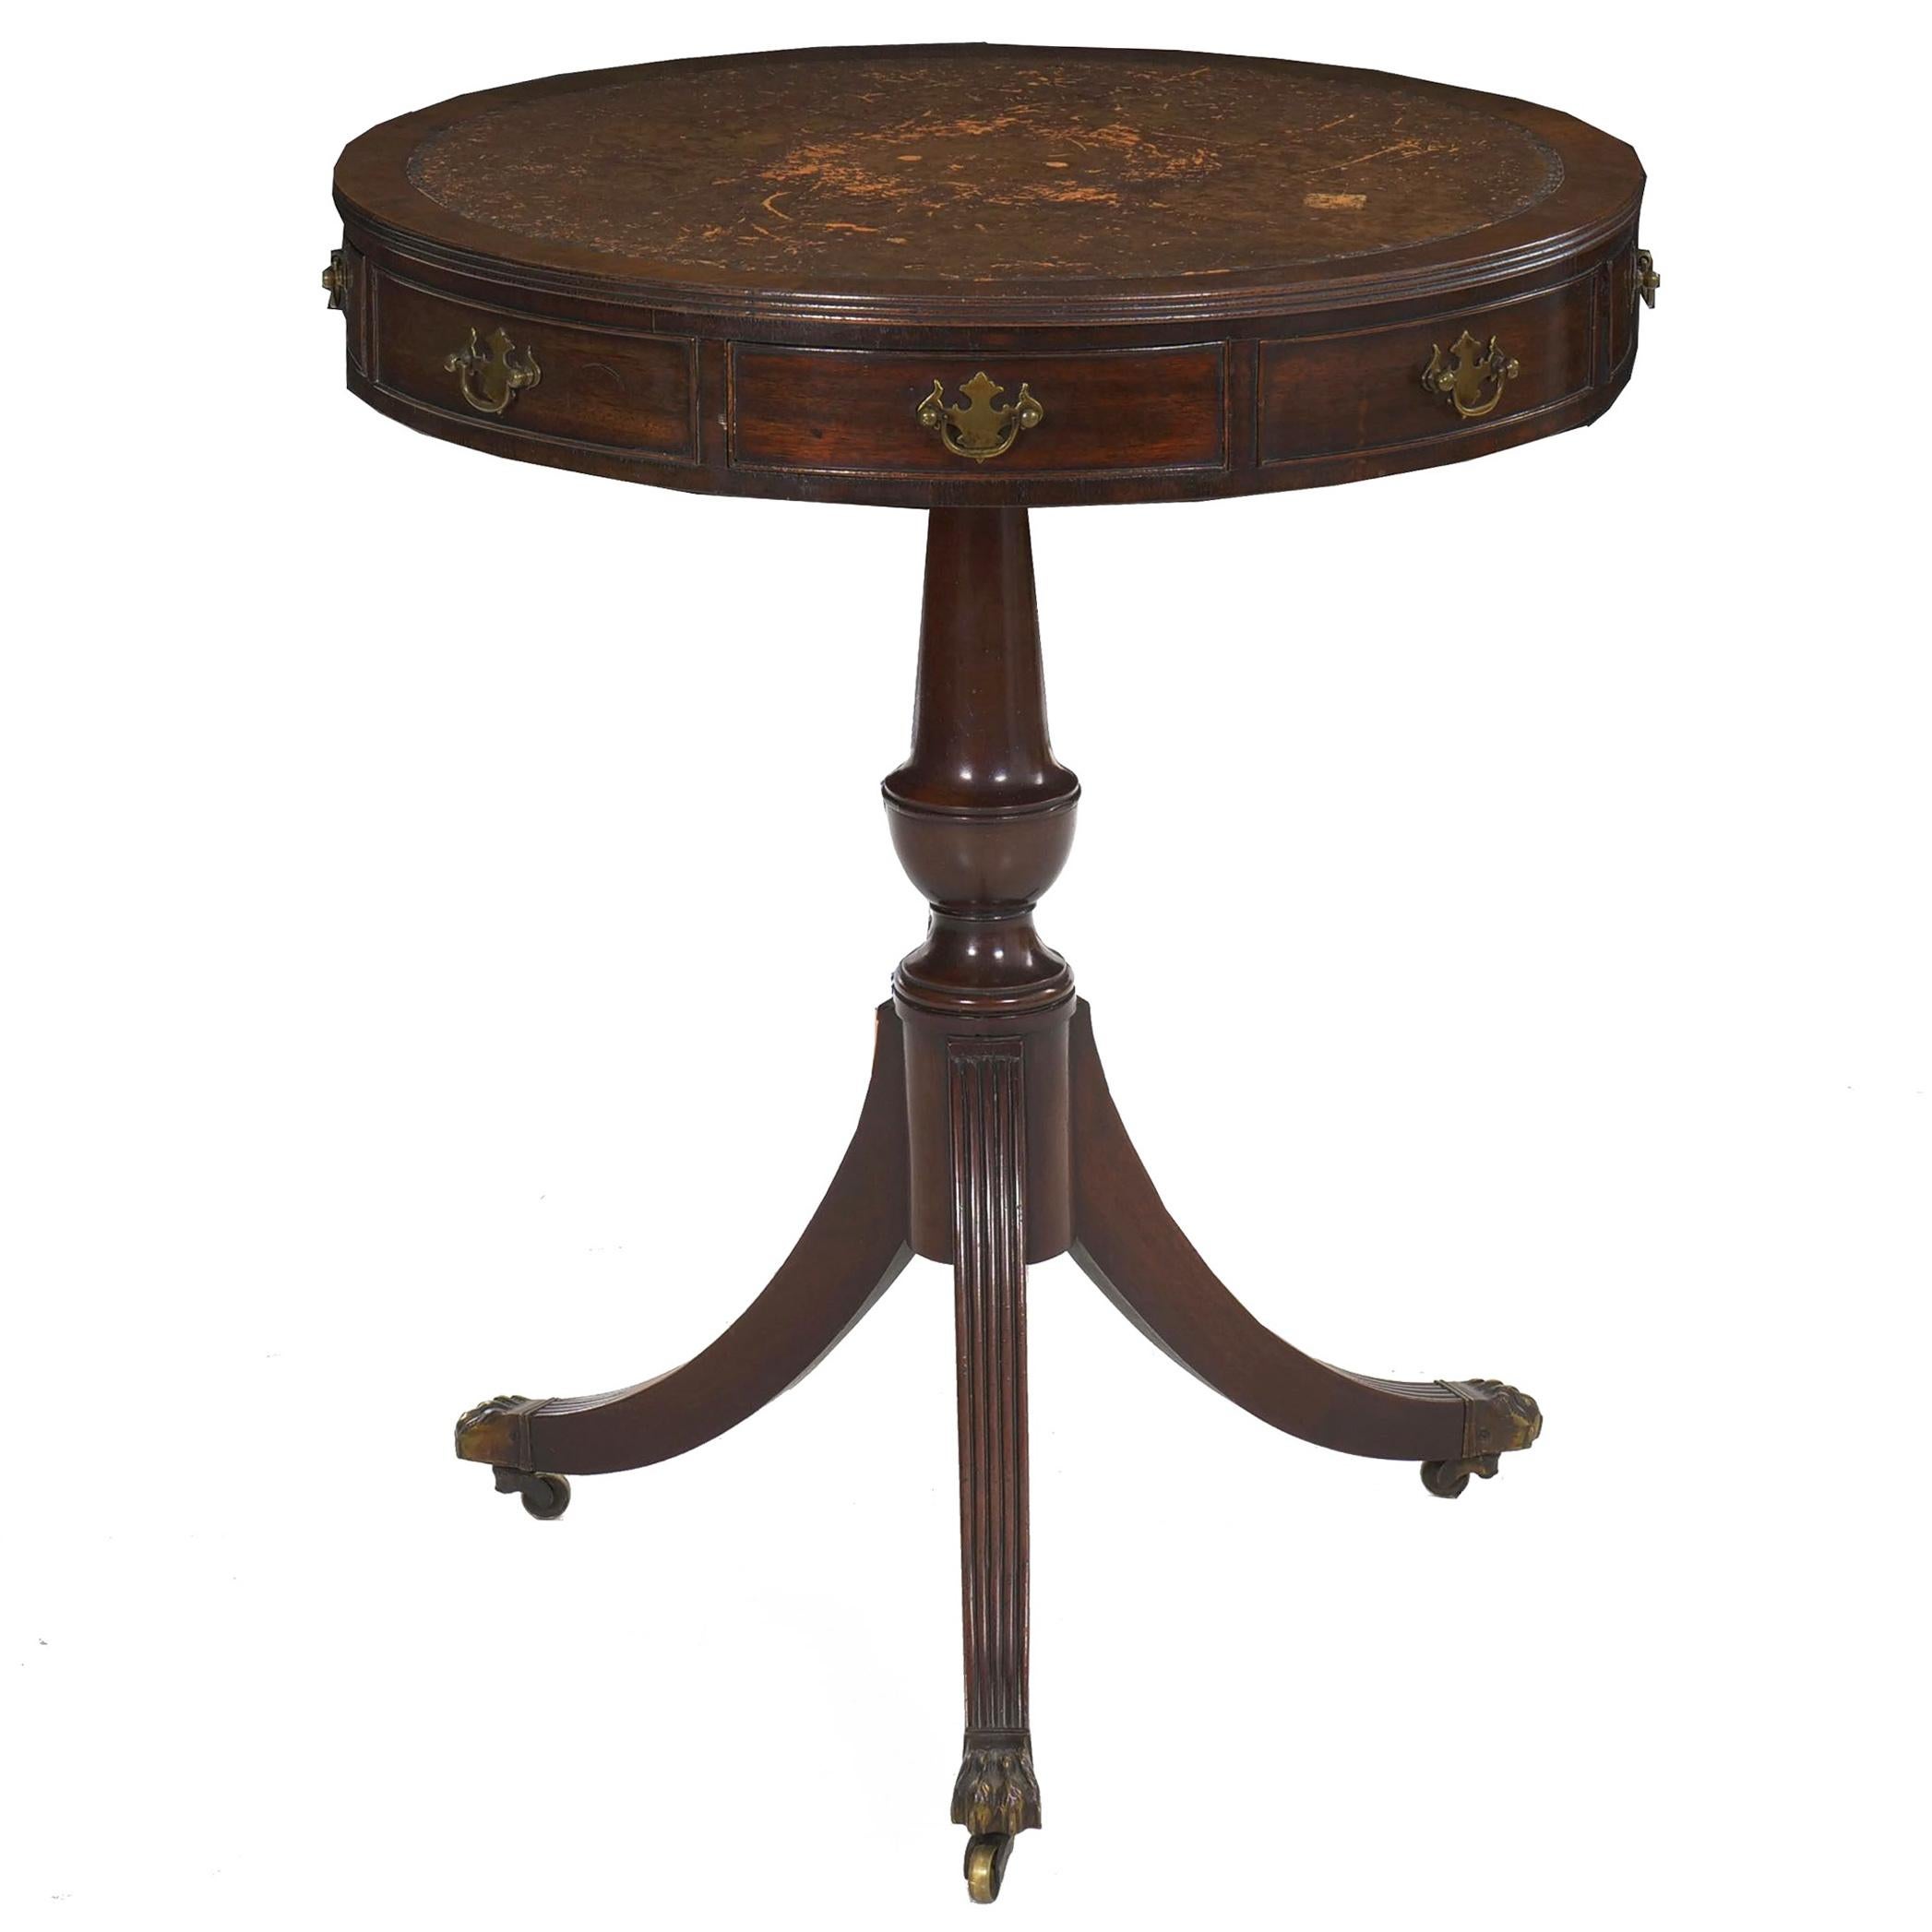 An attractive and beautifully patinated drum-top table in the Regency taste, the craftsmanship is true to the period and results in a very fine presentation. The leather is particularly nice with extensive natural wear that lends richness and warmth